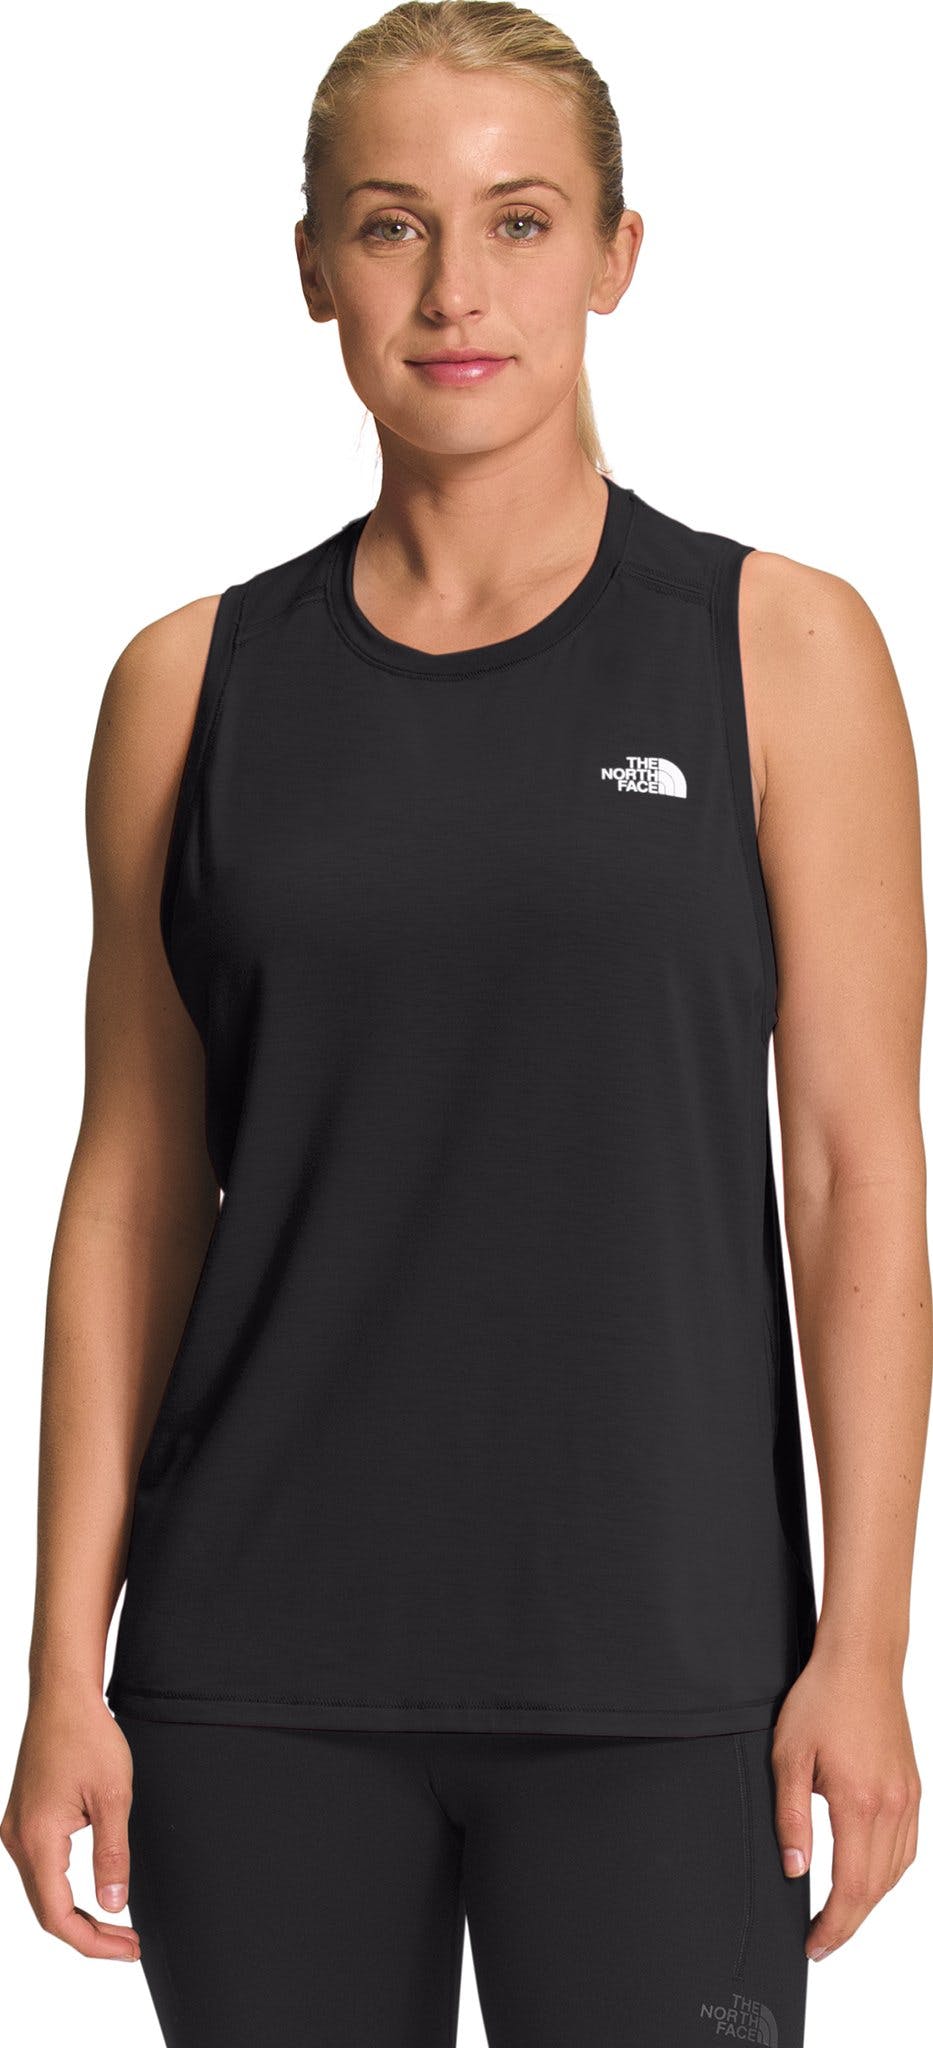 Product image for Wander Slitback Tank Top - Women’s